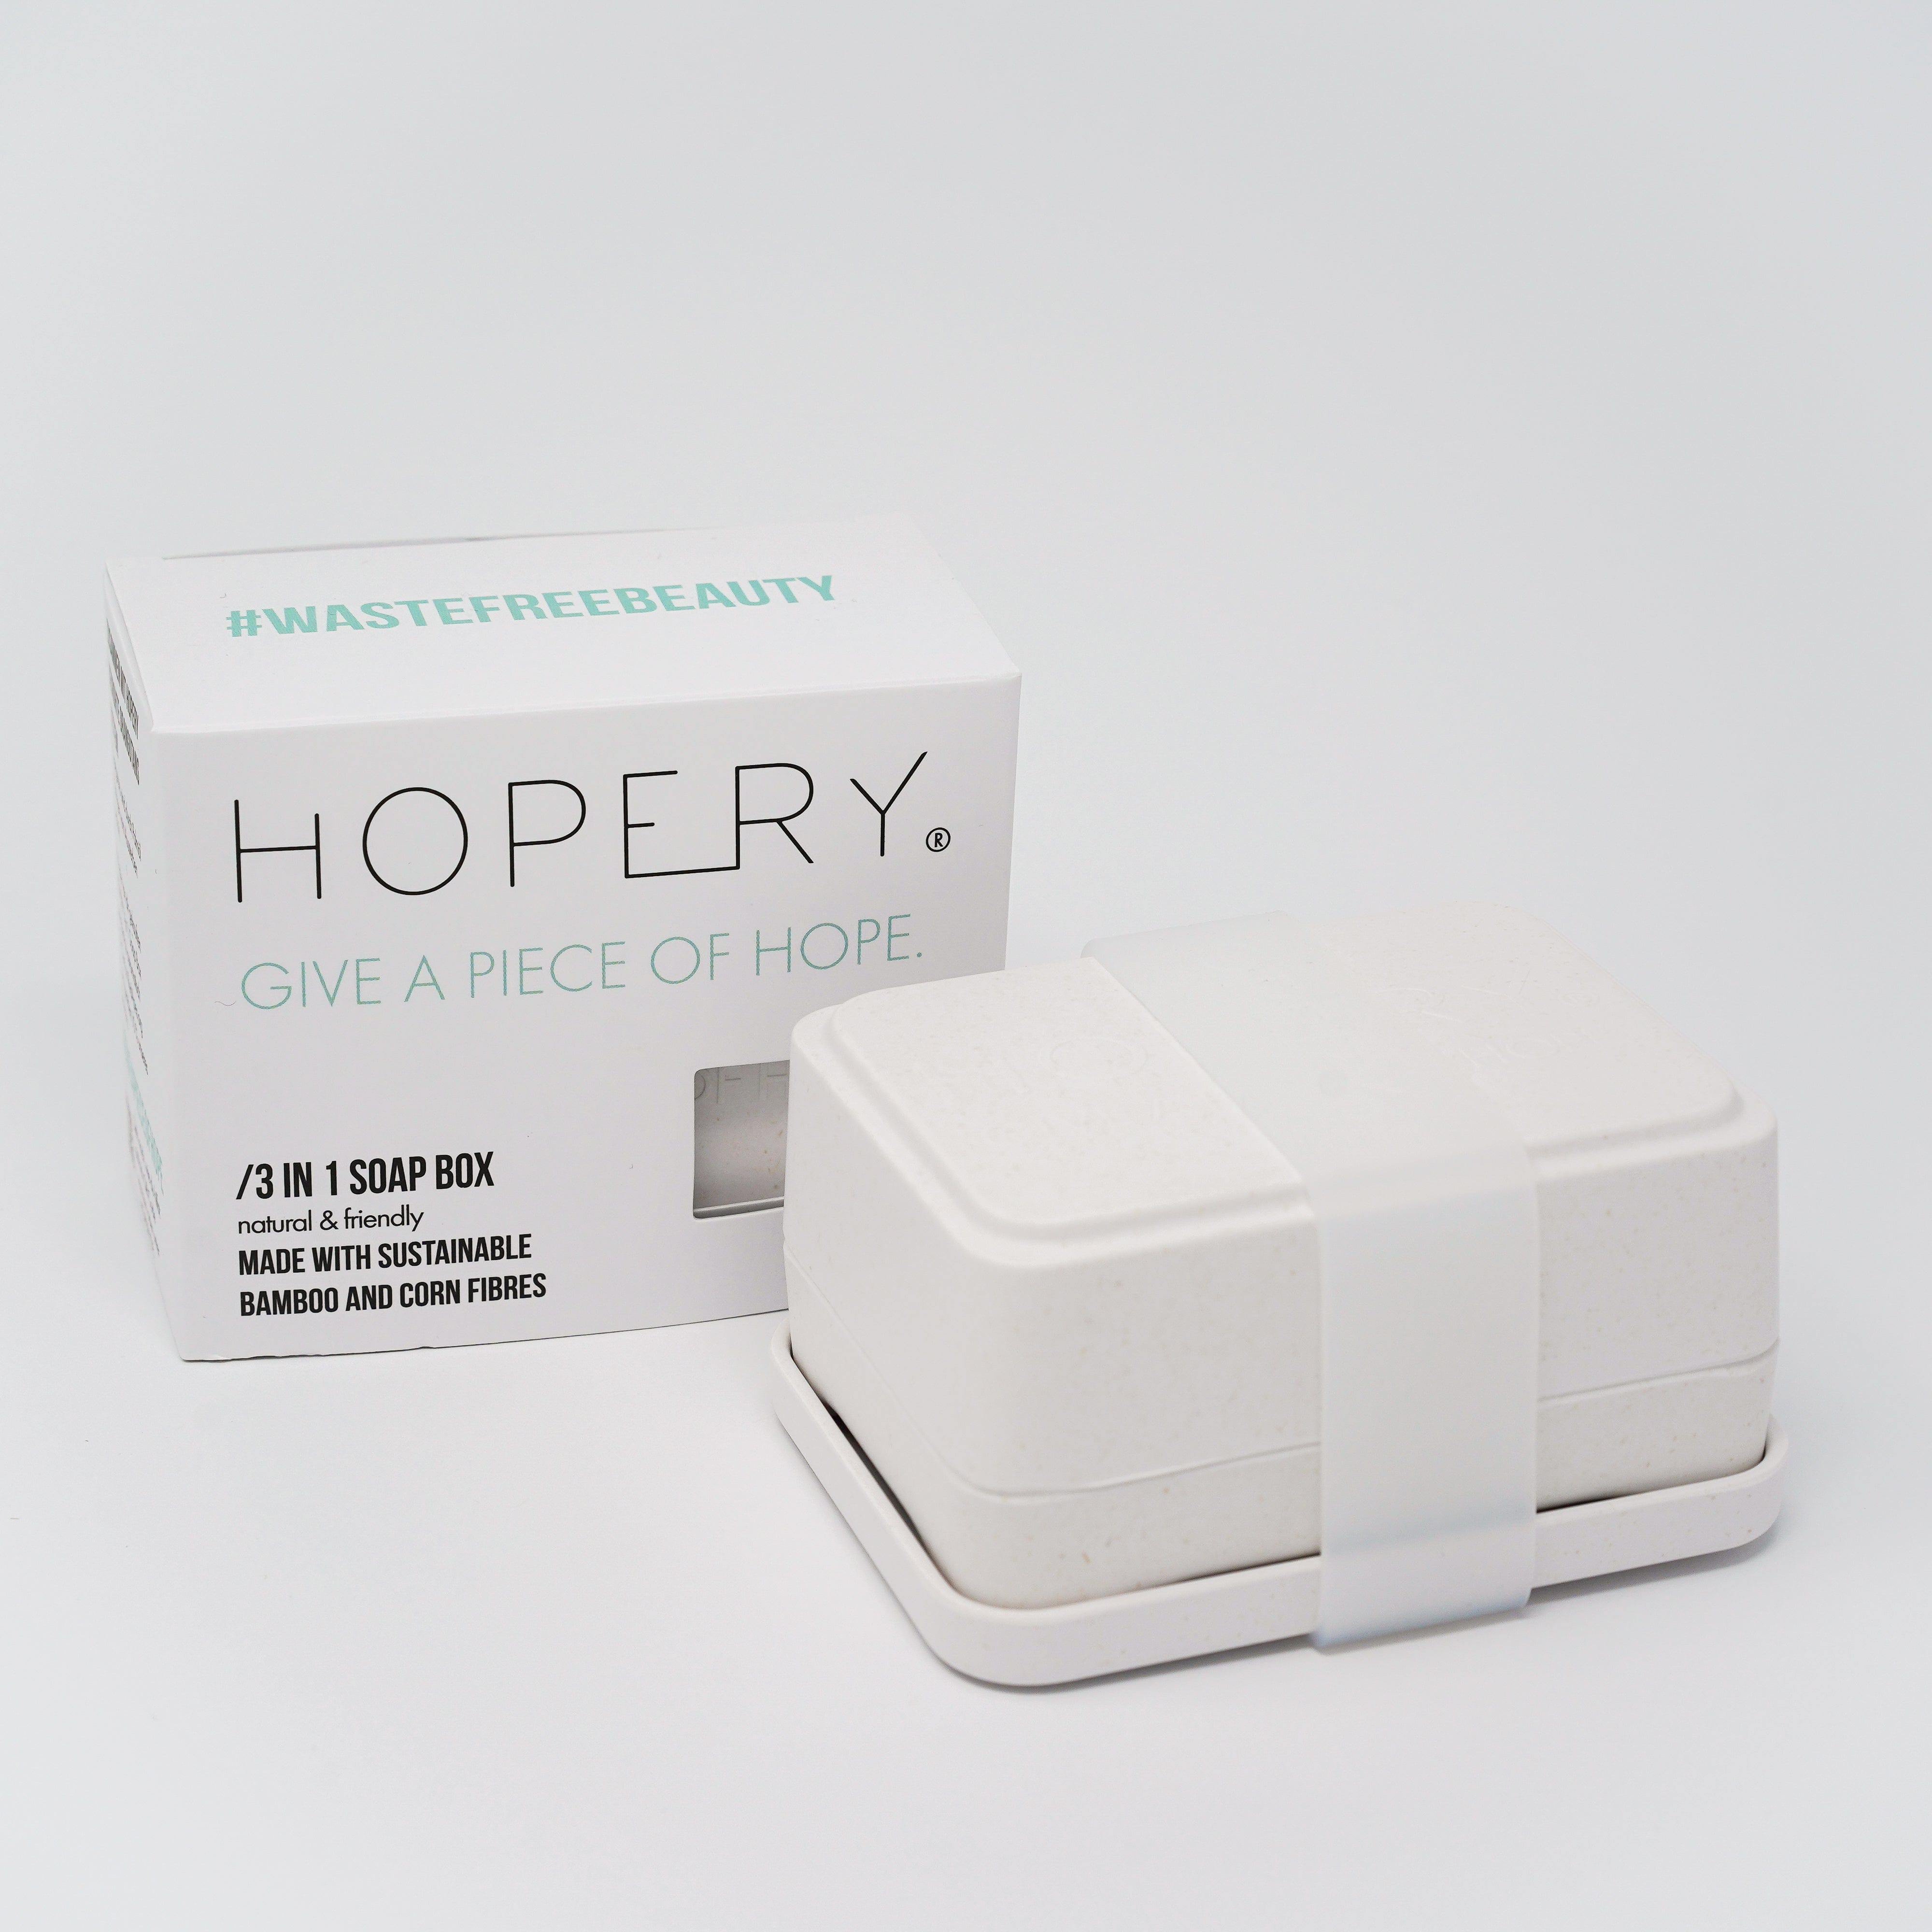 WHITE 3 in 1 SOAP BOX by HOPERY